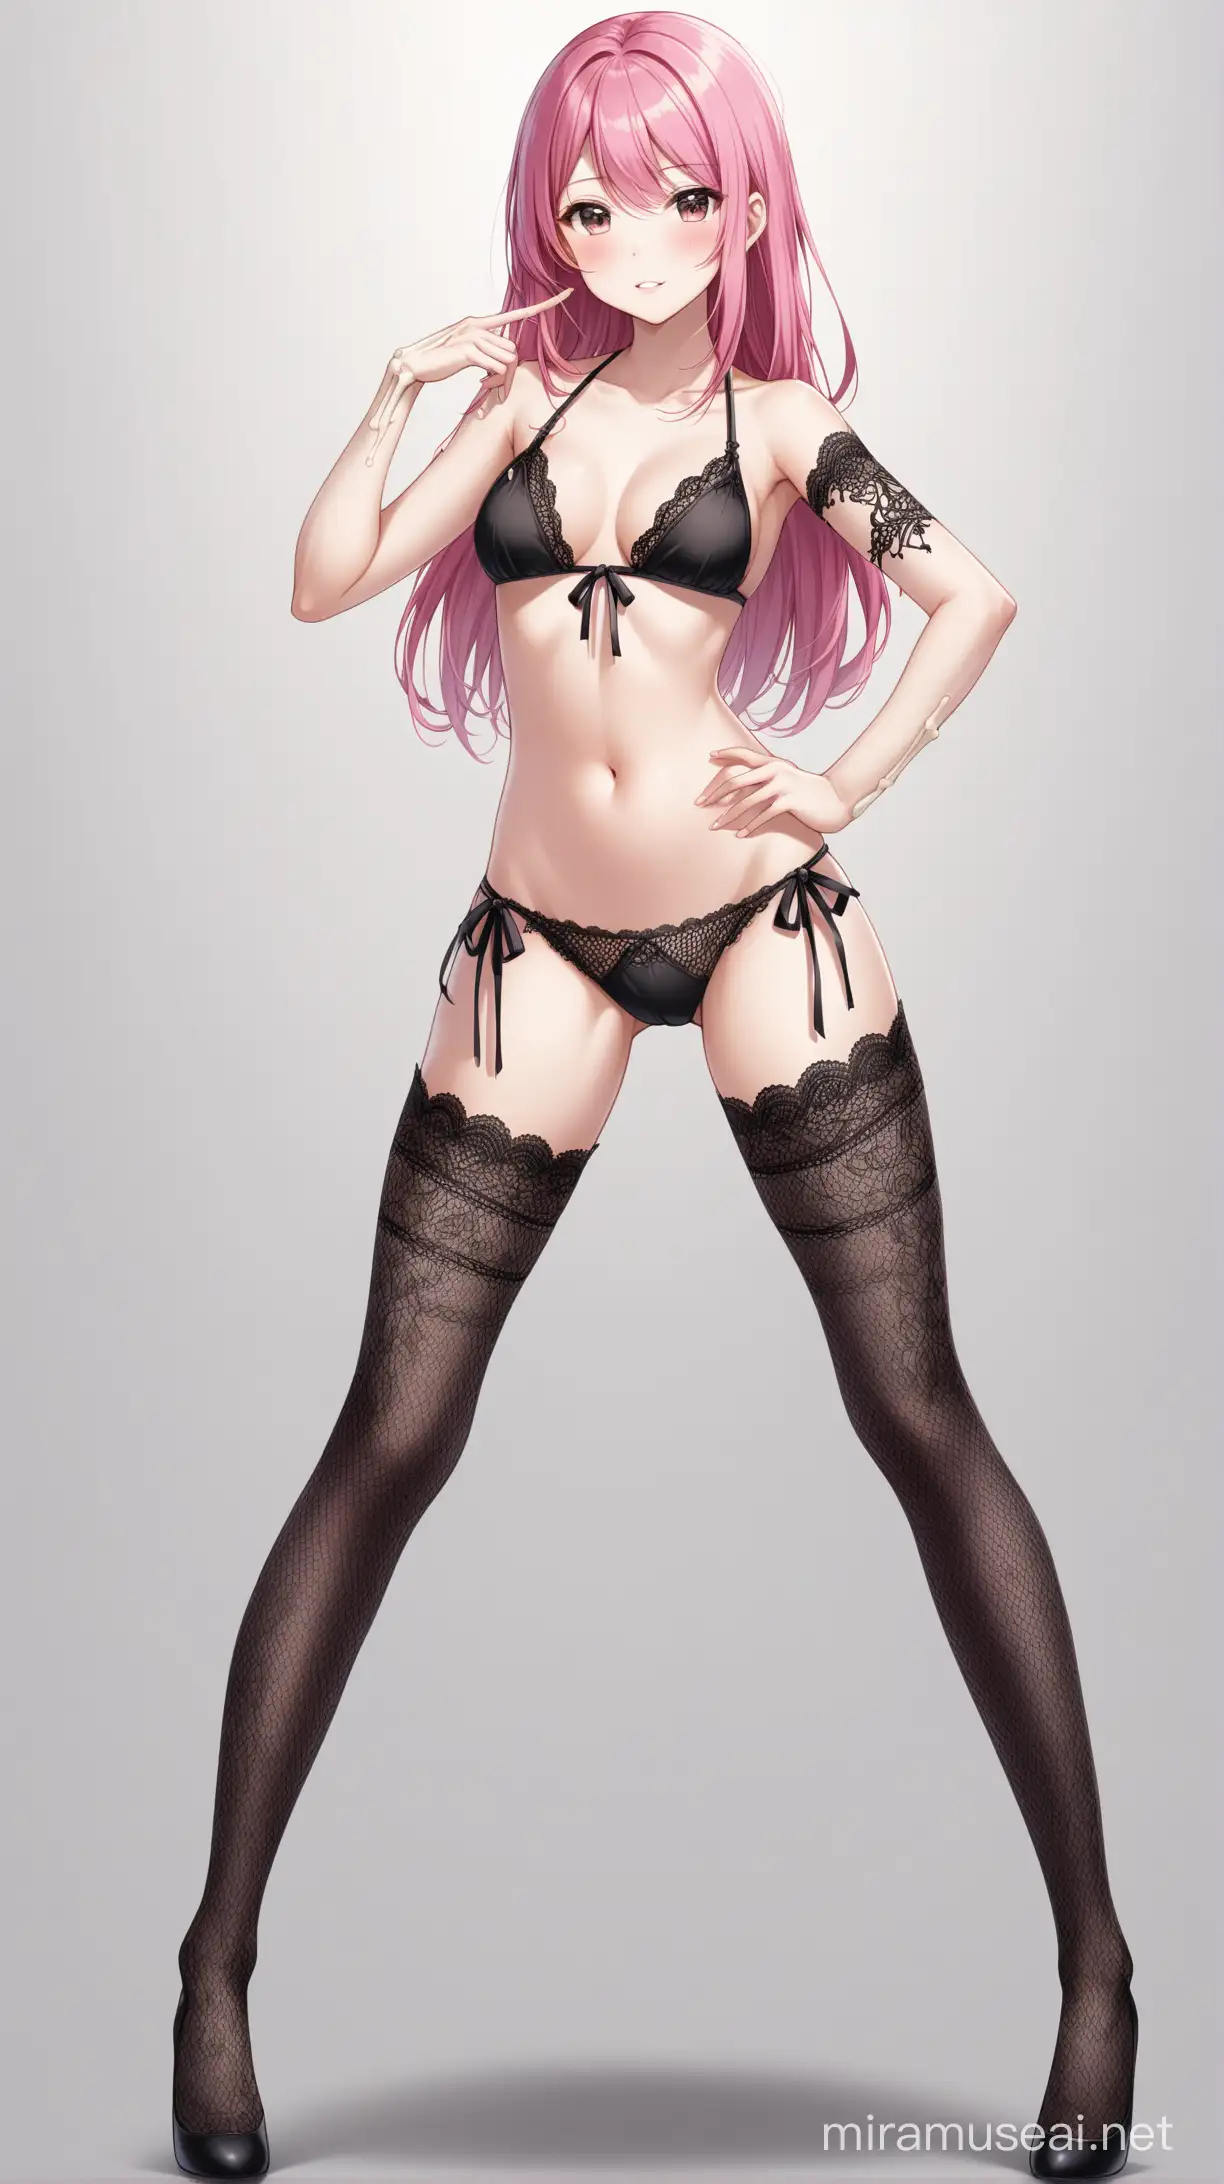 Full body Girl, ((with arm bone)), (upper arm bone), beautiful face, pink hair, wearing black lacy stockings, lacy bikini, hand beside poses, stand up straight, spread legs, grey baground